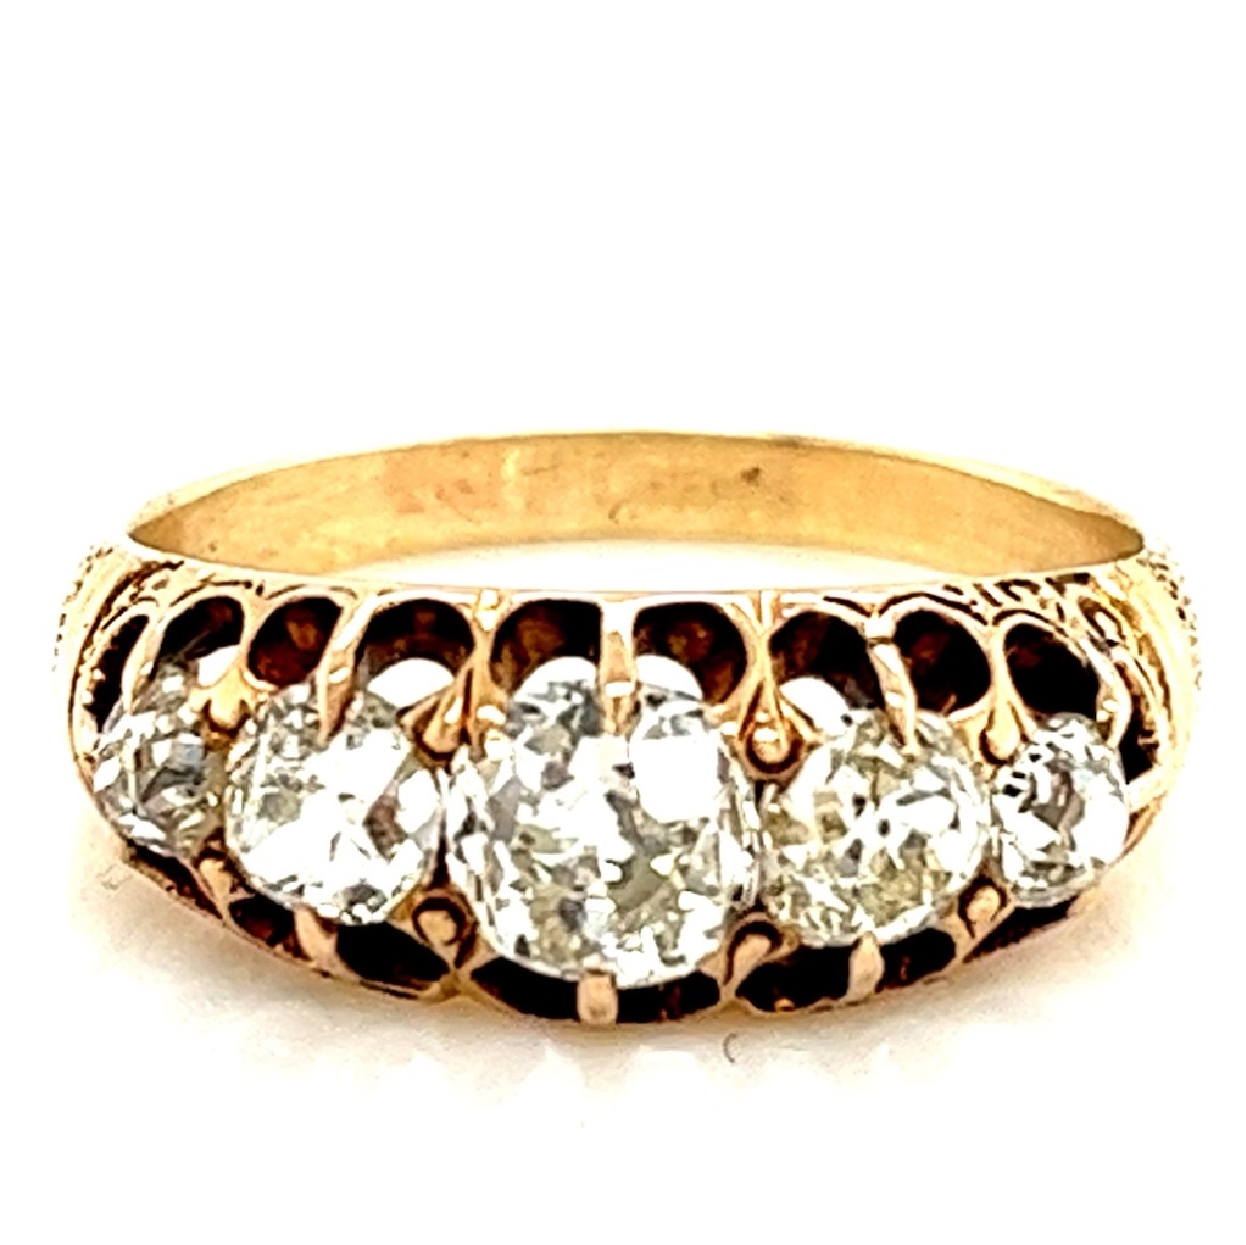 18K Yellow Gold Victorian Ring with Old Mine Cut Diamonds
1.40cttw
Size 6.75